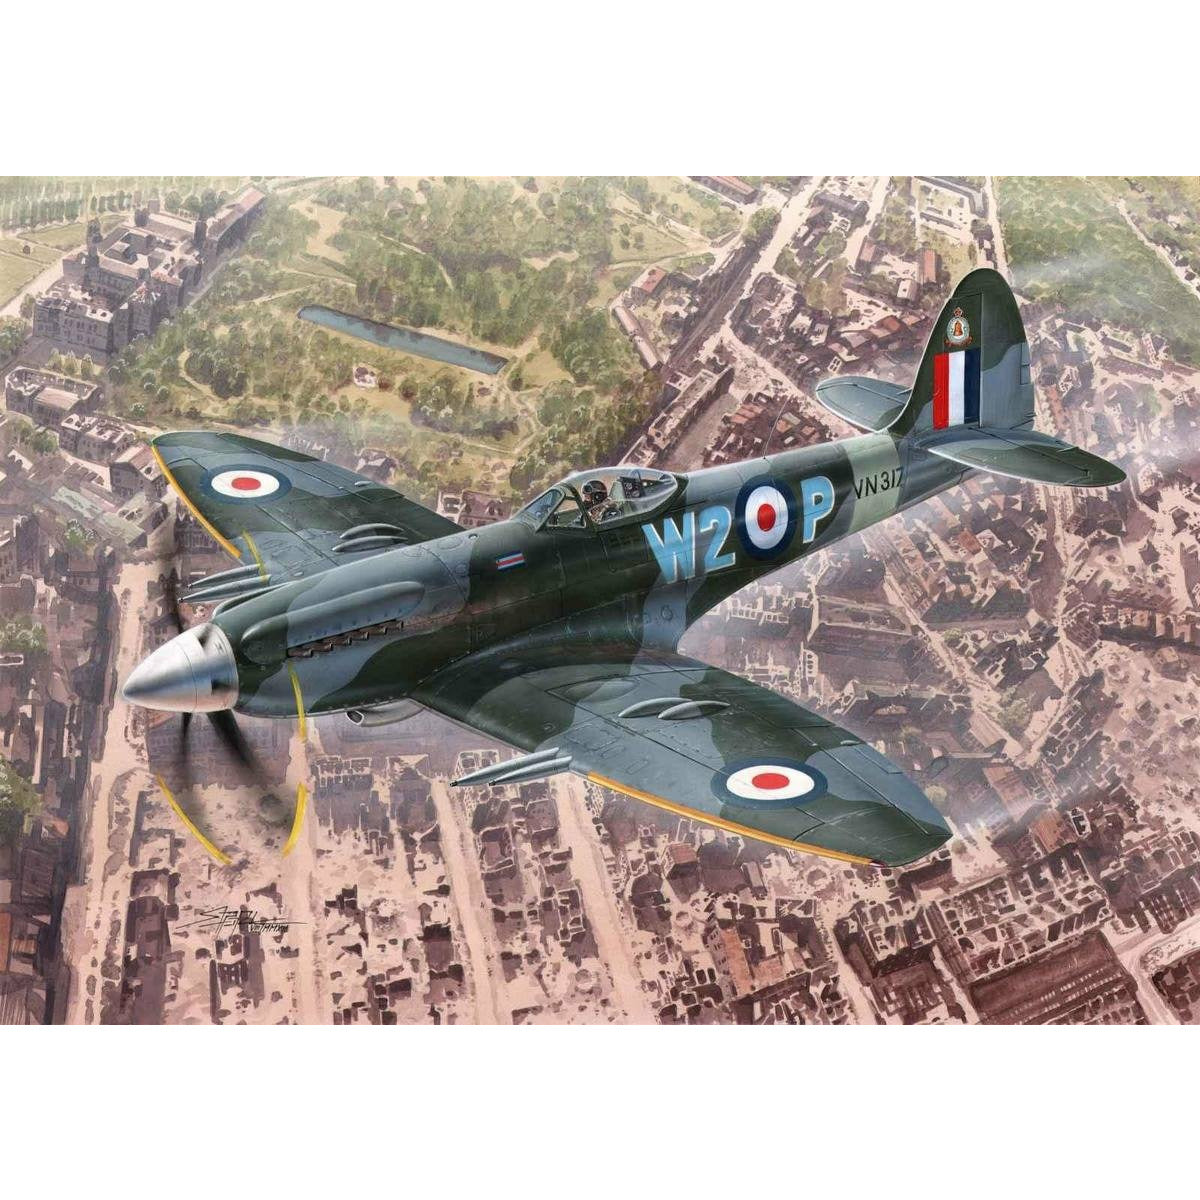 Supermarine Spitfire Mk.24 "Last of Best" 1/72 #72233 by Special Hobby